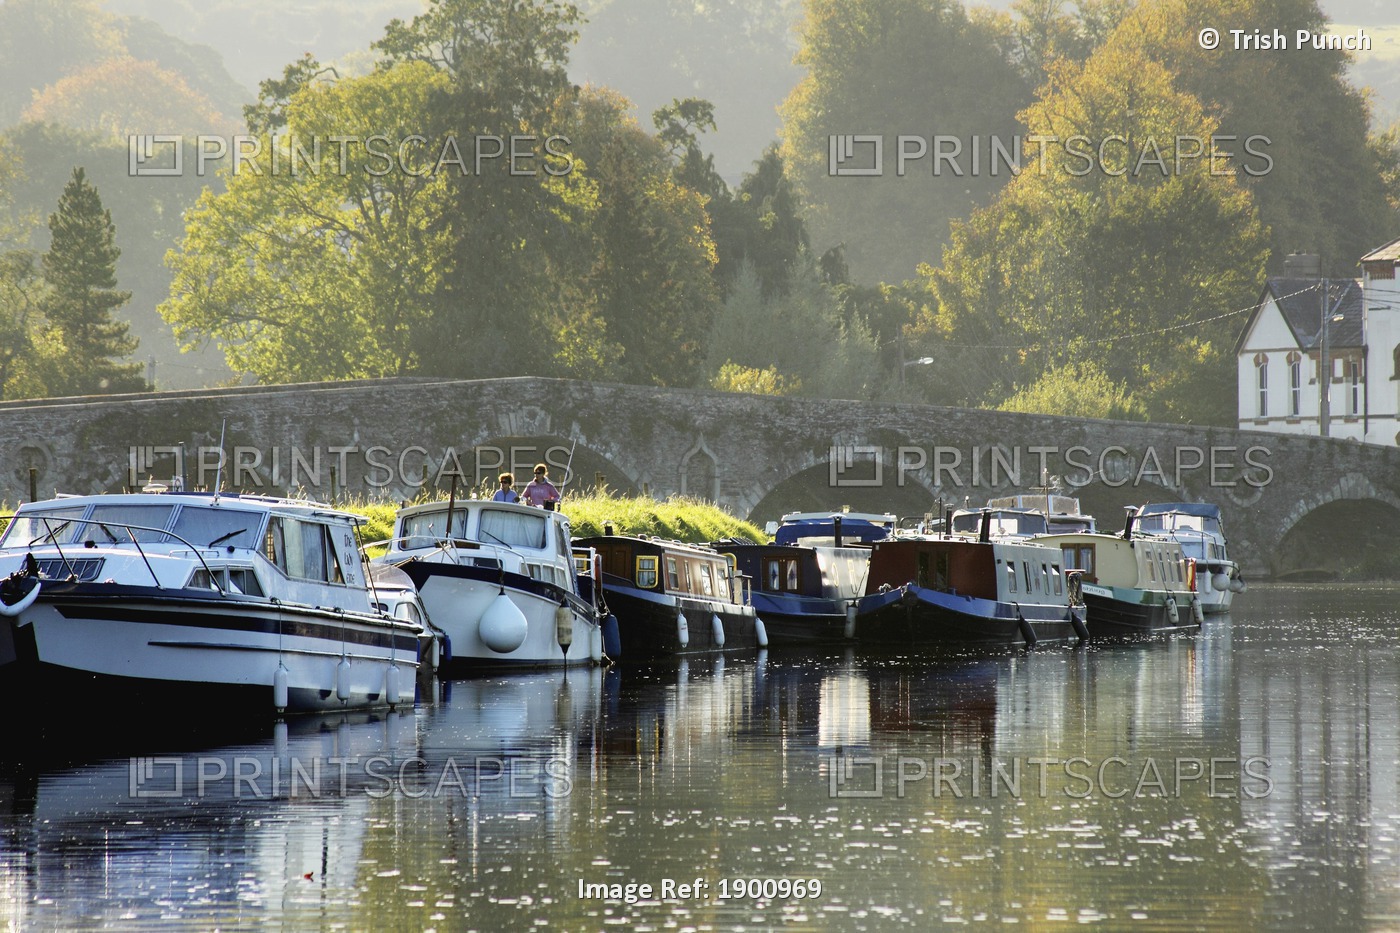 Moored Boats On The River Barrow In Leinster Region; Graiguenamanagh, County ...